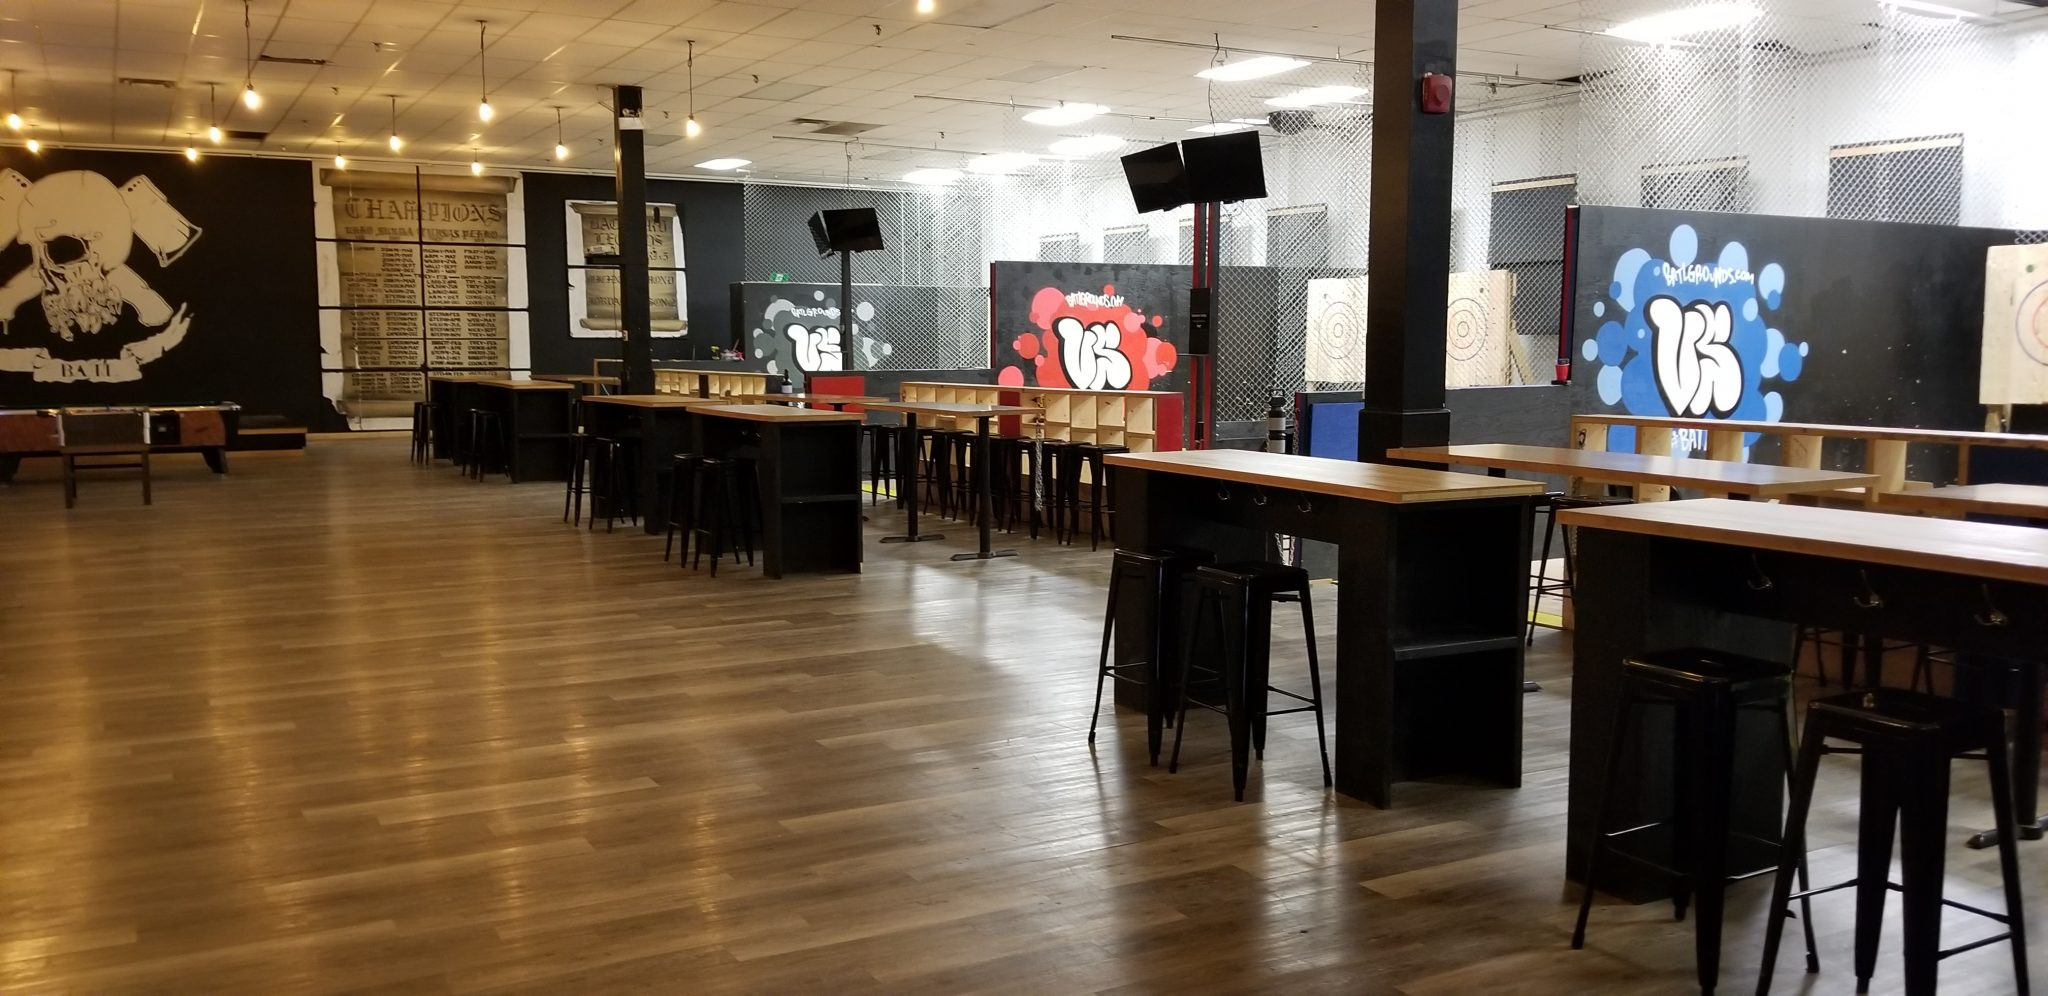 14 Awesome Yorkdale Hardwood Flooring Centre toronto On 2024 free download yorkdale hardwood flooring centre toronto on of axe throwing toronto est 2006 join the batl with 20180705 180707